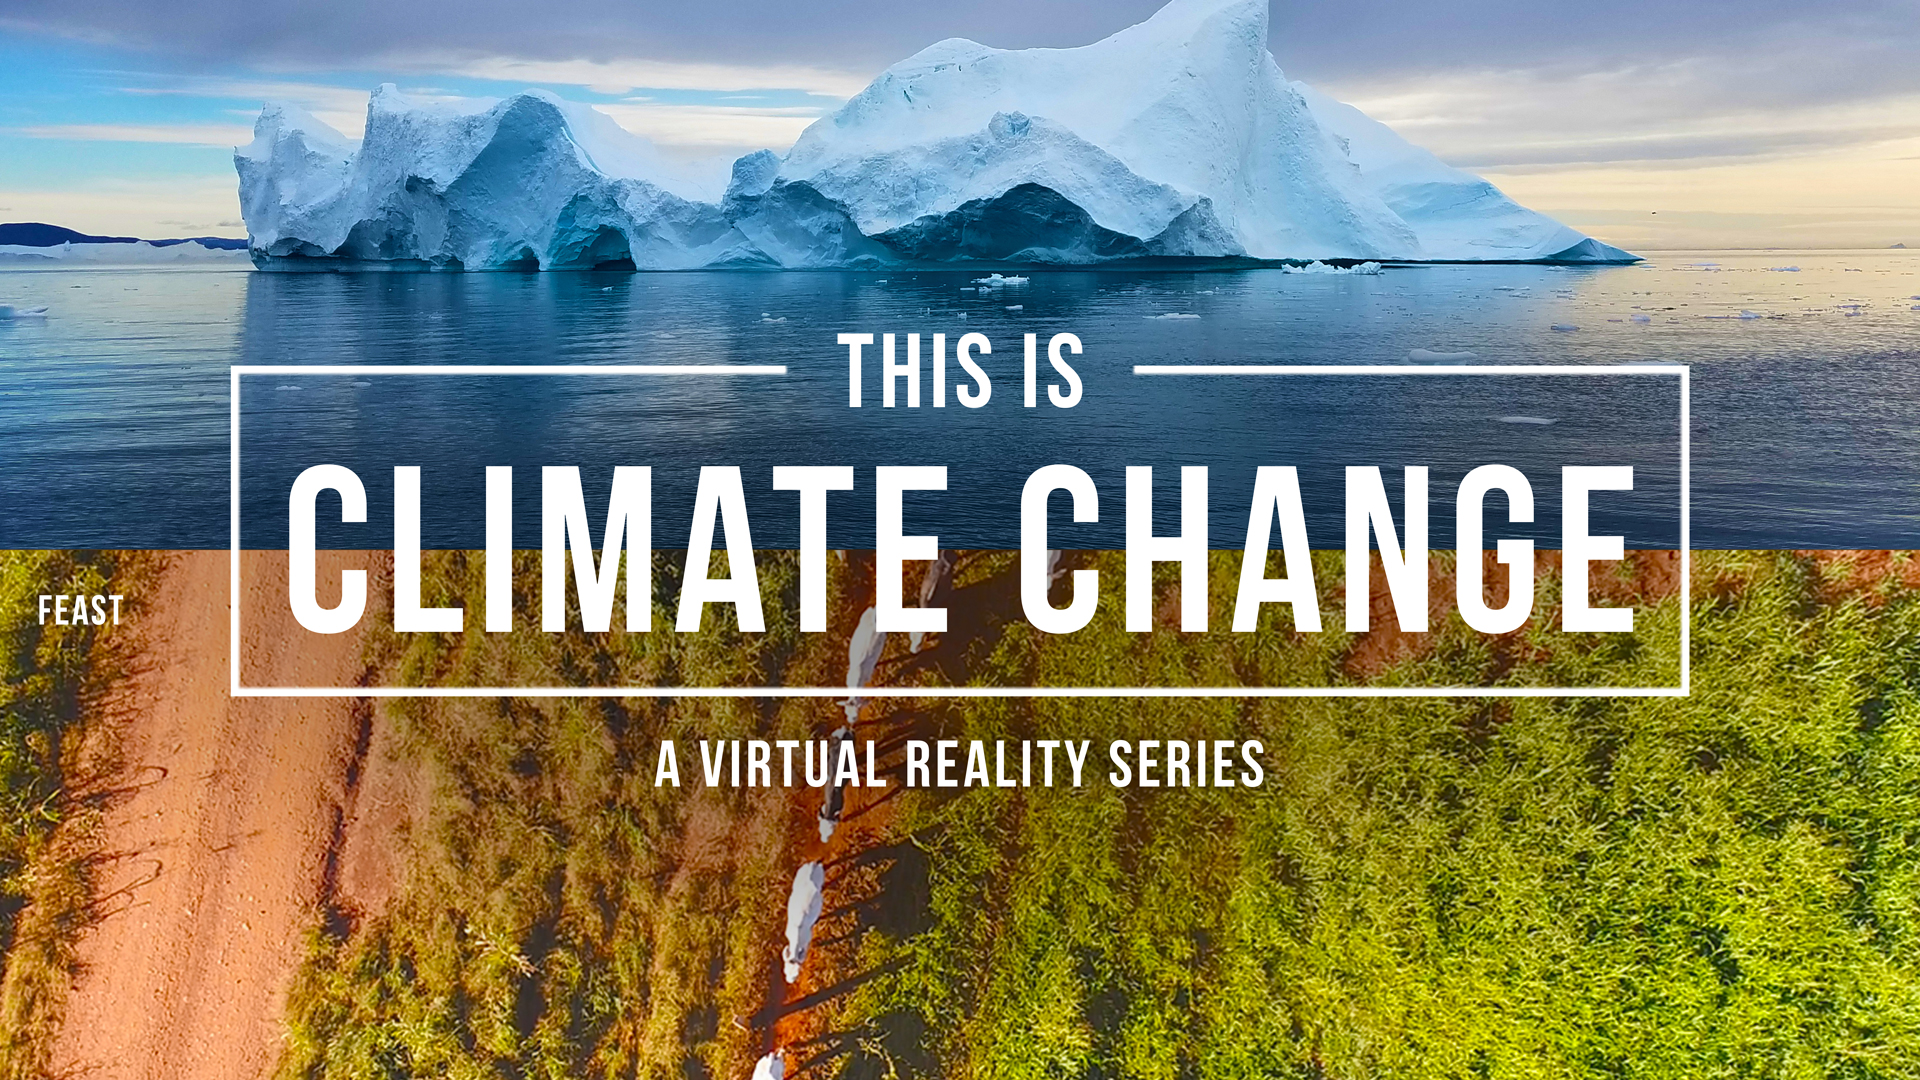 Virtual reality filmmaking - This is climate change VR series